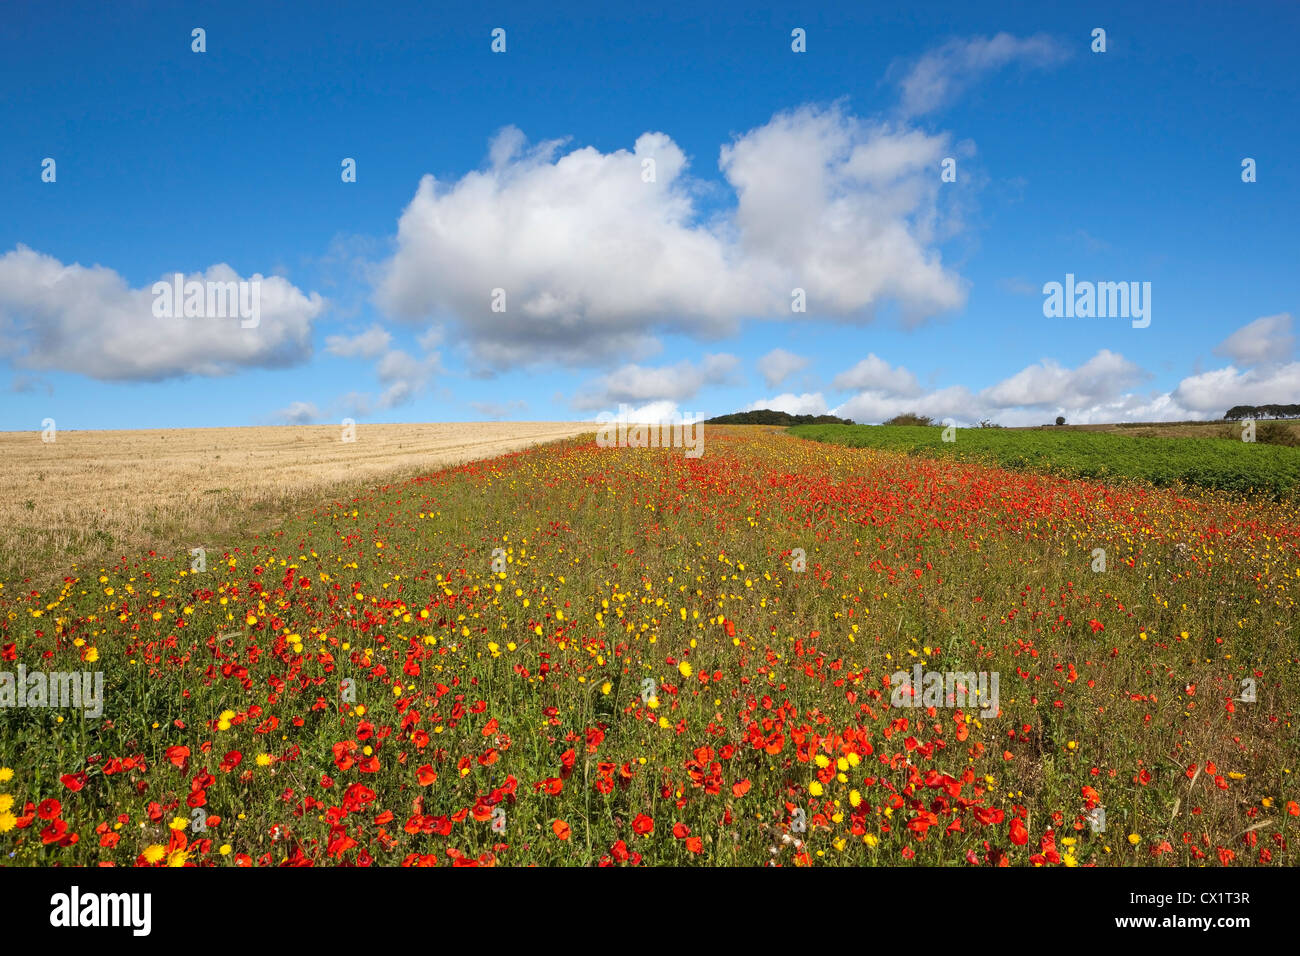 A wildflower landscape in late summer on the Yorkshire wolds england under a blue cloudy sky with poppies hawksbeard and flax Stock Photo